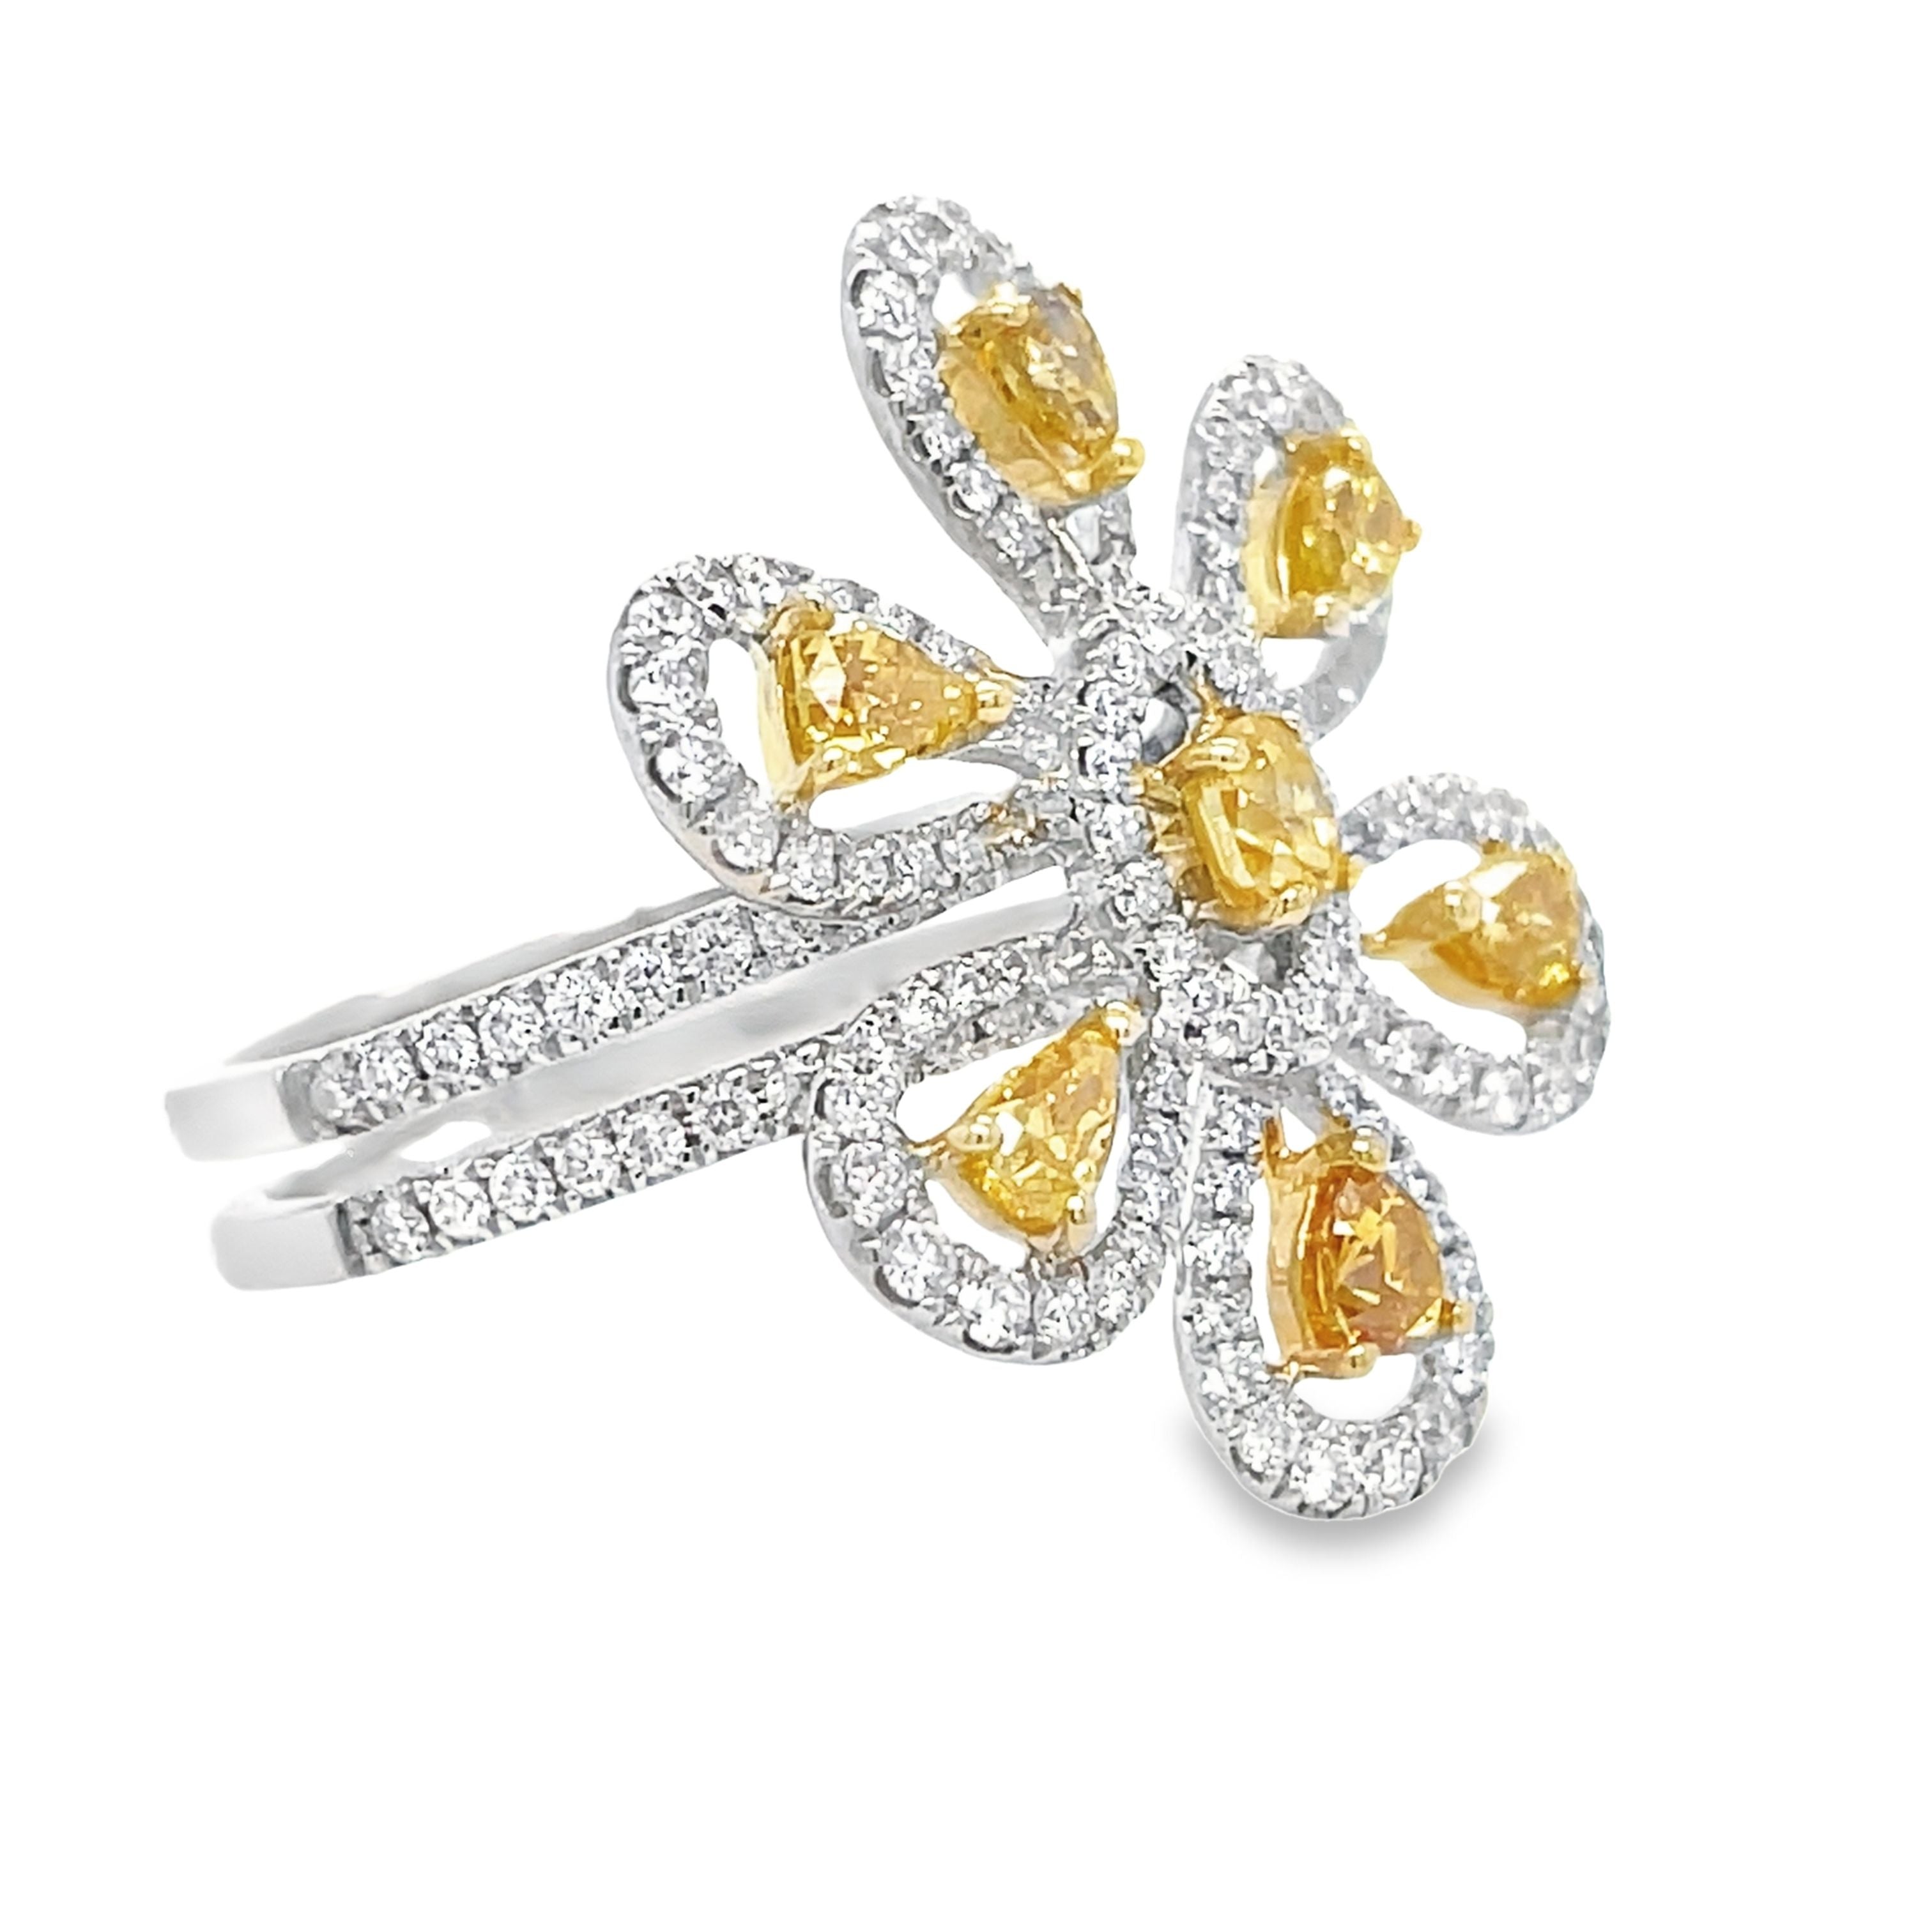 This exquisite cocktail ring features a stunning one-of-a-kind design, with a large diamond flower centerpiece surrounded by high-quality yellow diamonds 0.89 cts and round diamonds 0.82 cts. Crafted from 18k white gold, its double shank adds elegance and sparkle. Measuring 24.50 mm in width, this size 7 (sizeable) ring is a true statement piece.